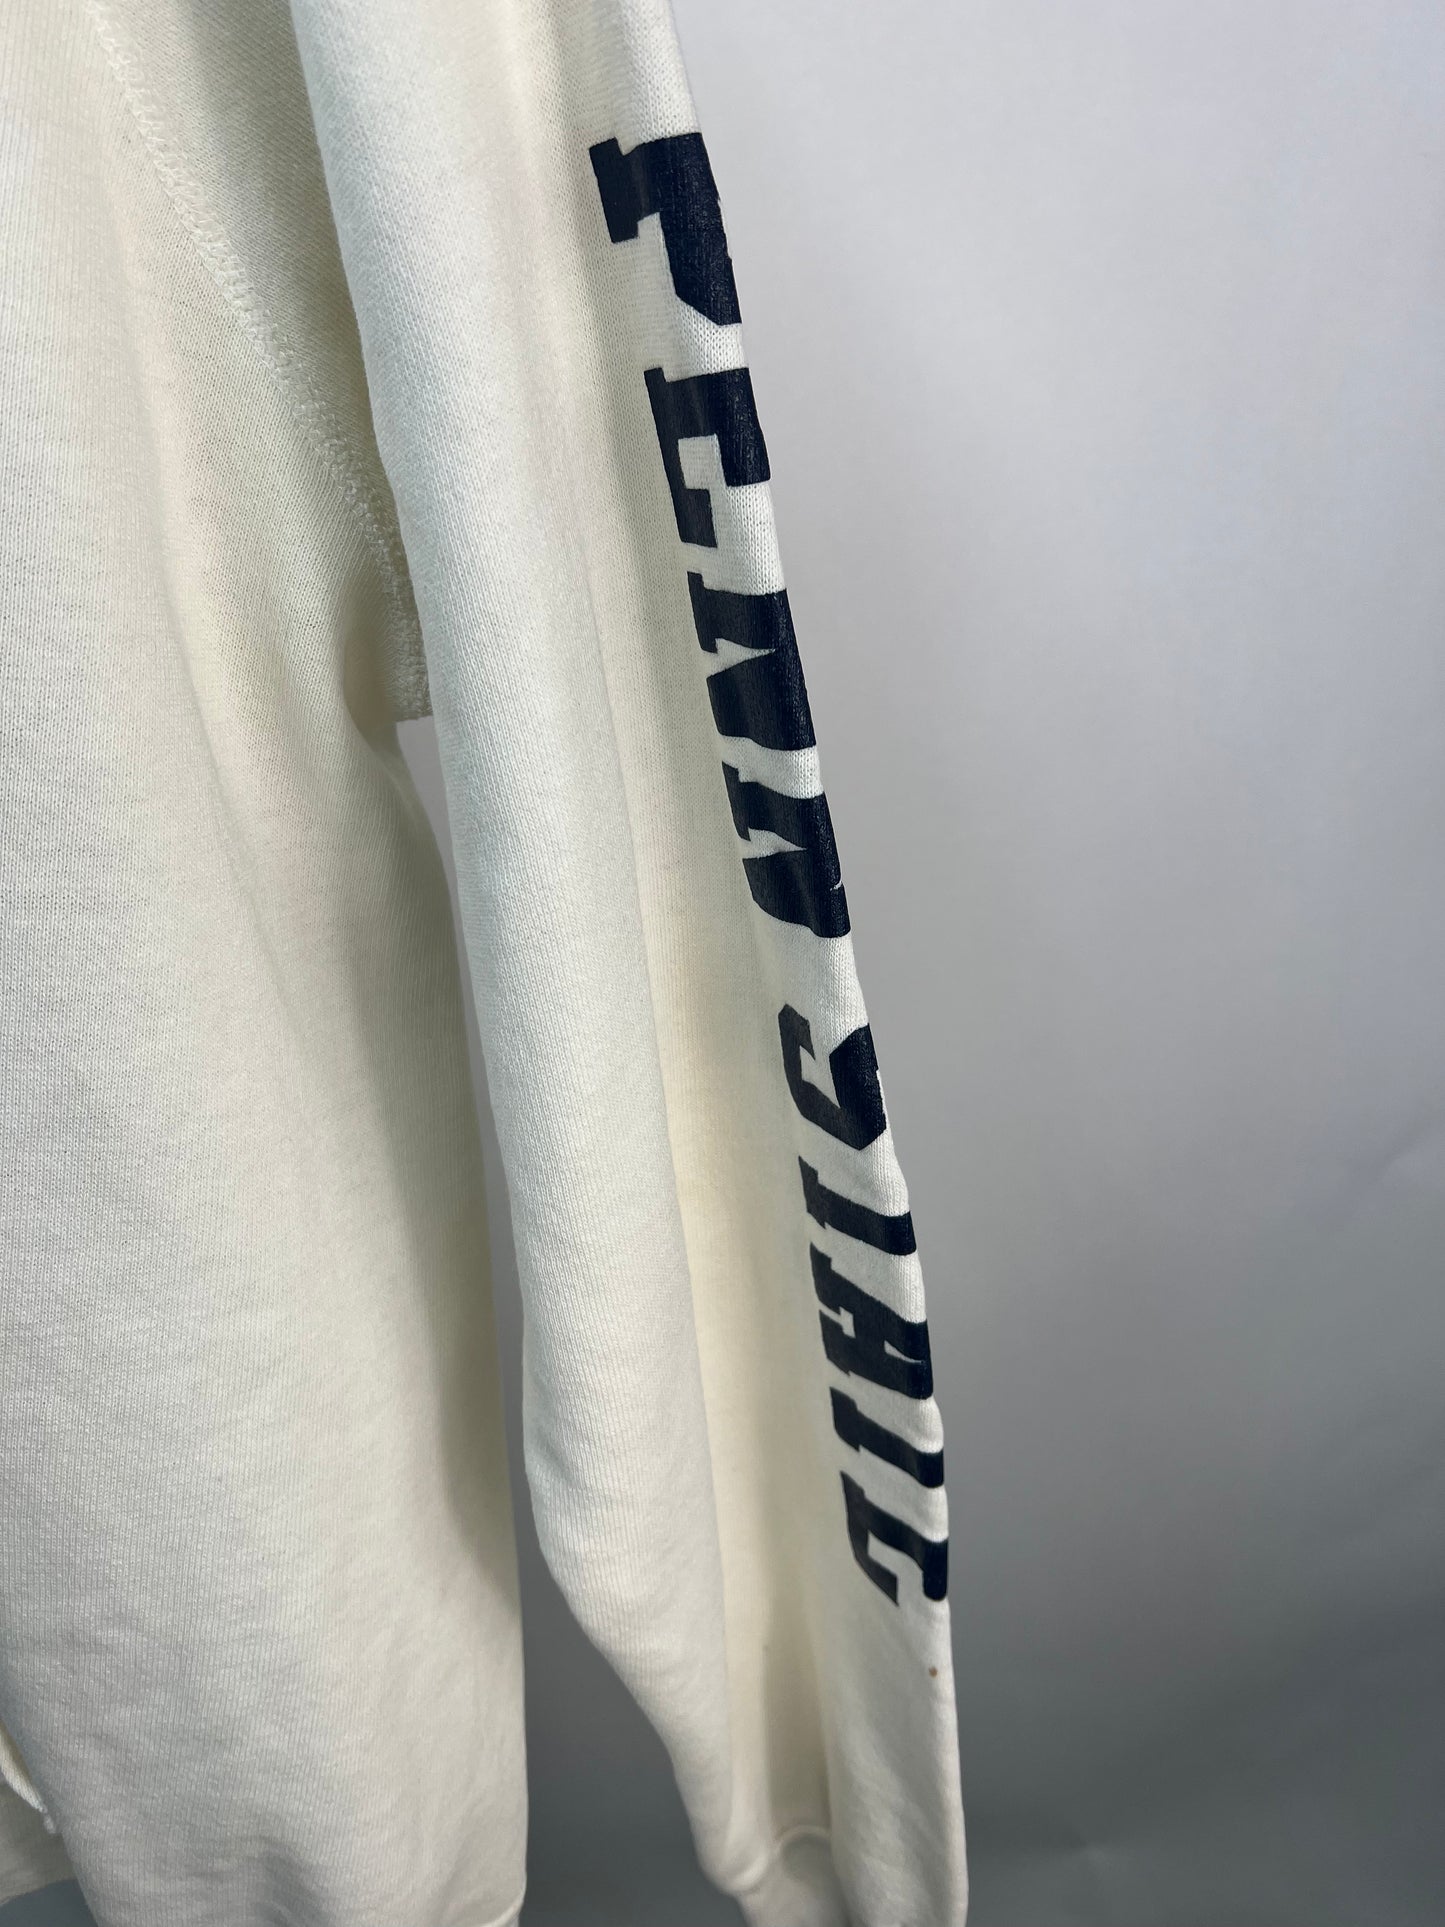 Load image into Gallery viewer, VTG Penn State Champion Hoodie Sz M
